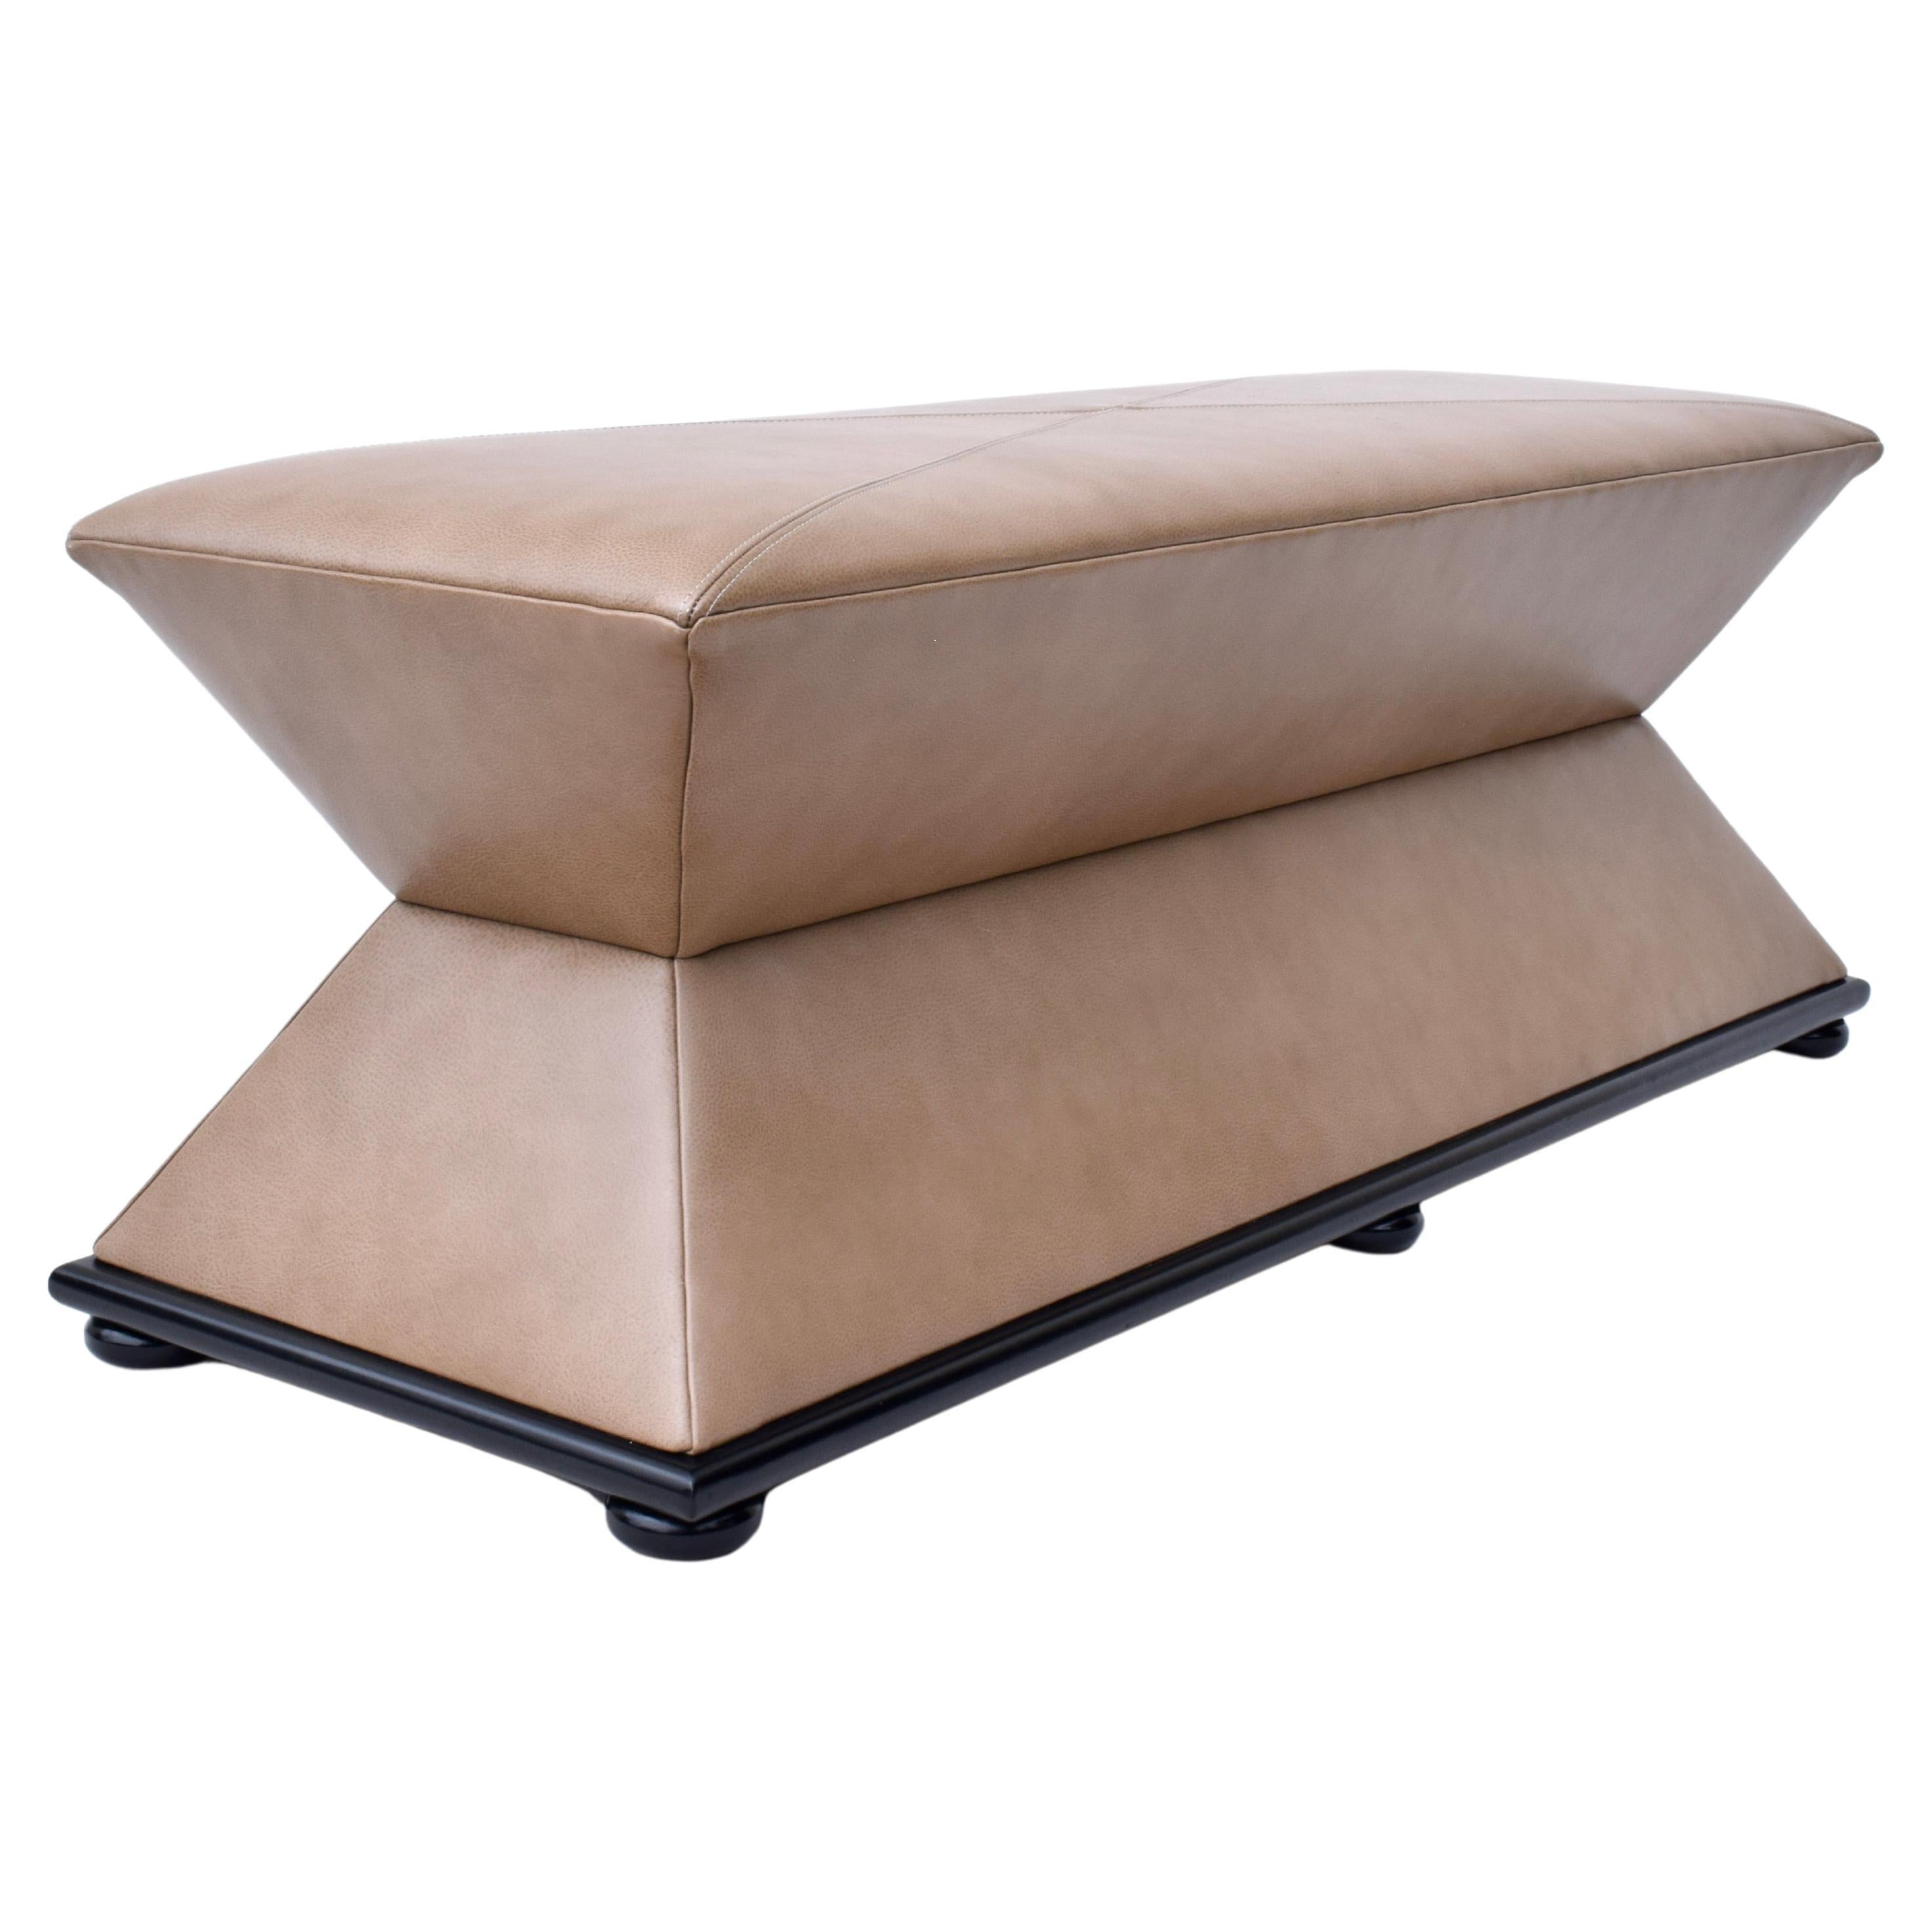 French Modernist Style Leather Hourglass Bench Ottoman For Sale